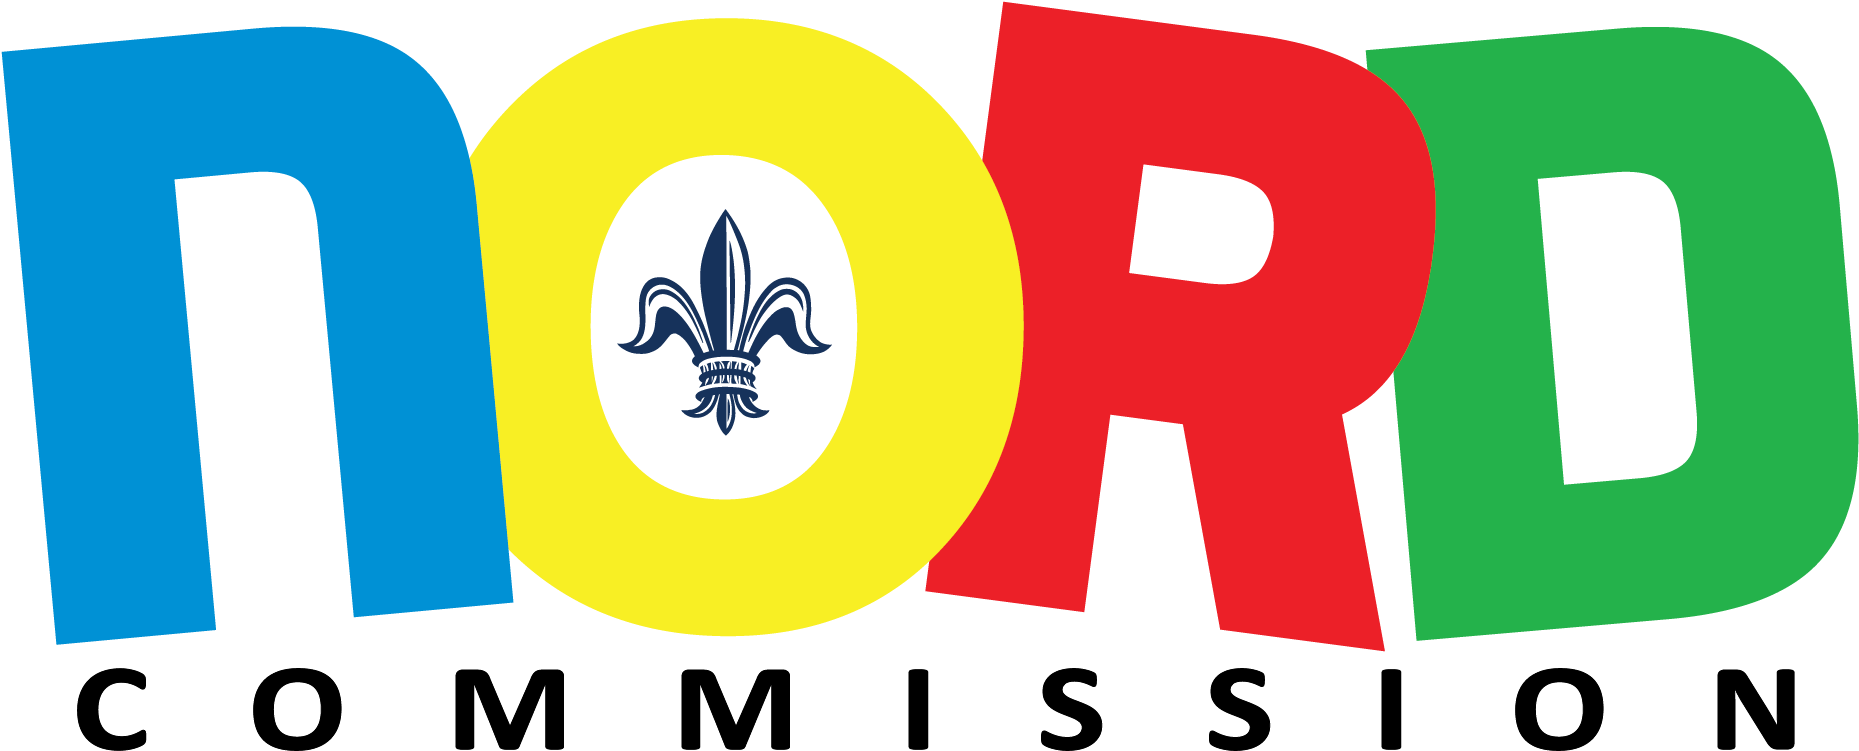 Nord Commission Text Logo Final - City Of New Orleans (1858x787)